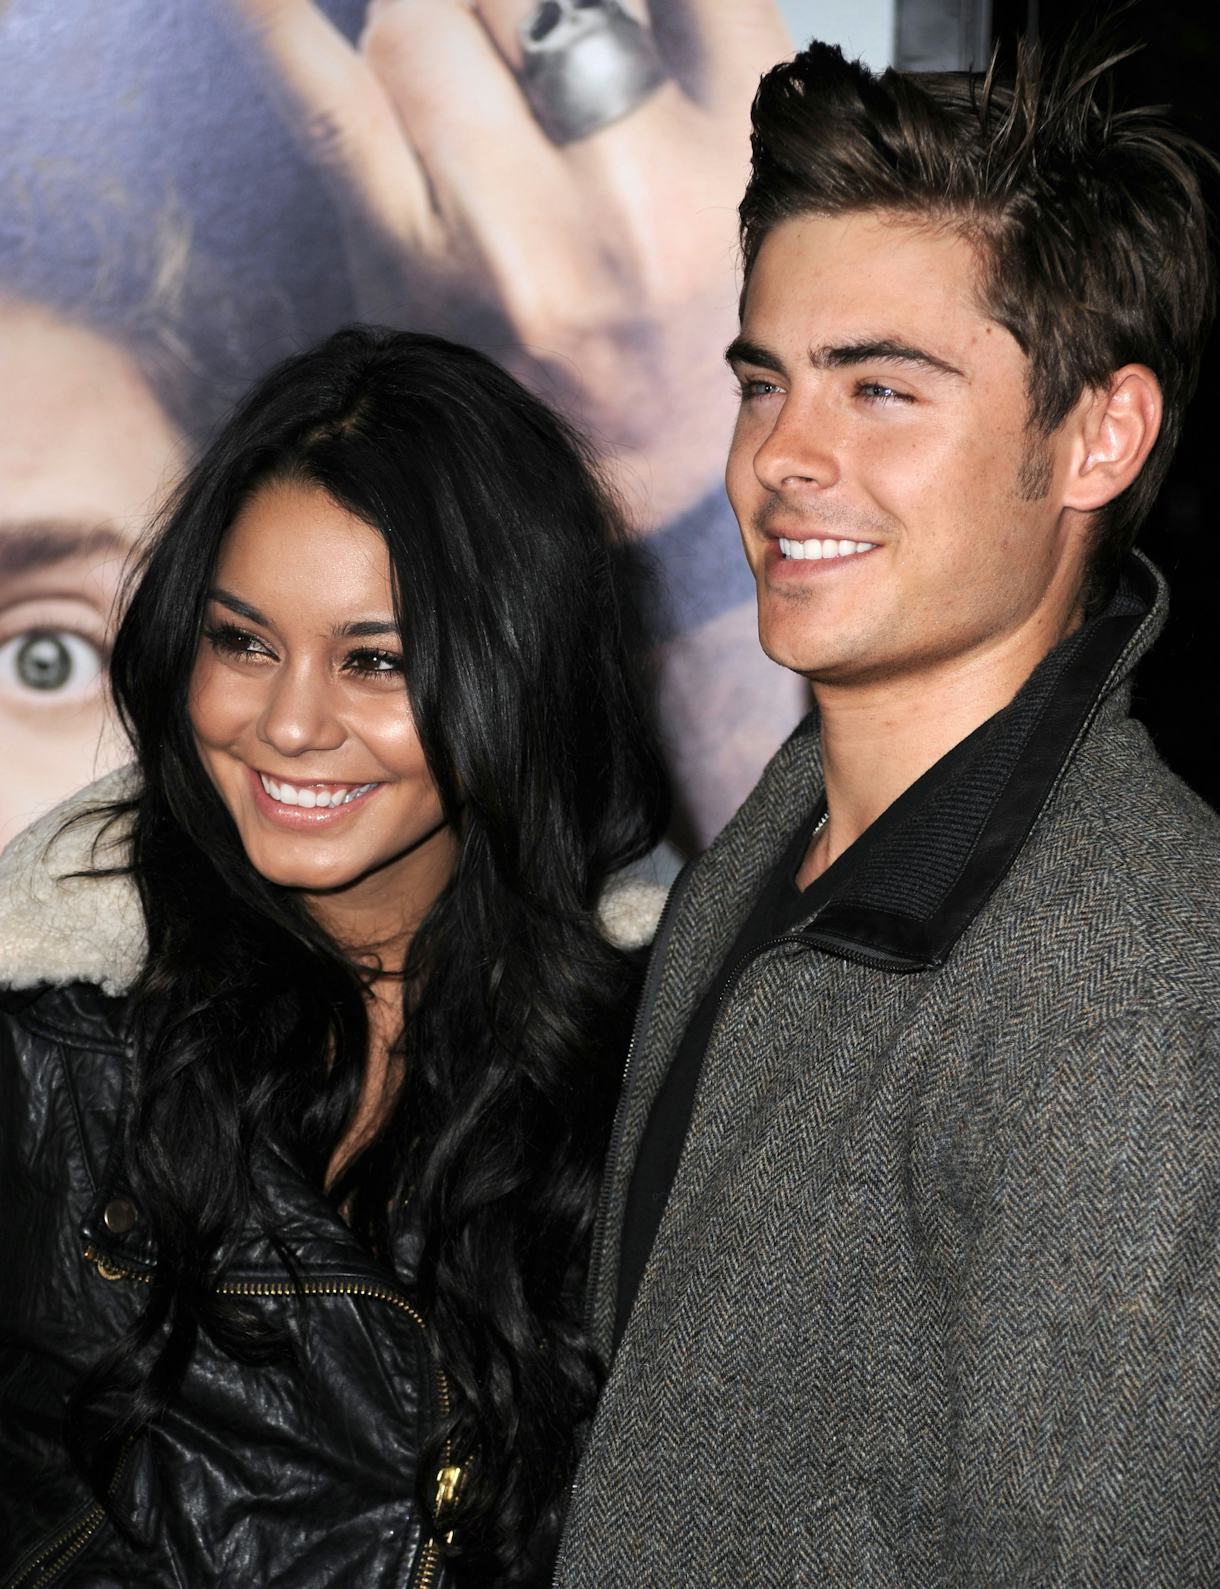 Zac Efron And Vanessa Hudgens Relationship Their Timeline Quotes And Where They Stand